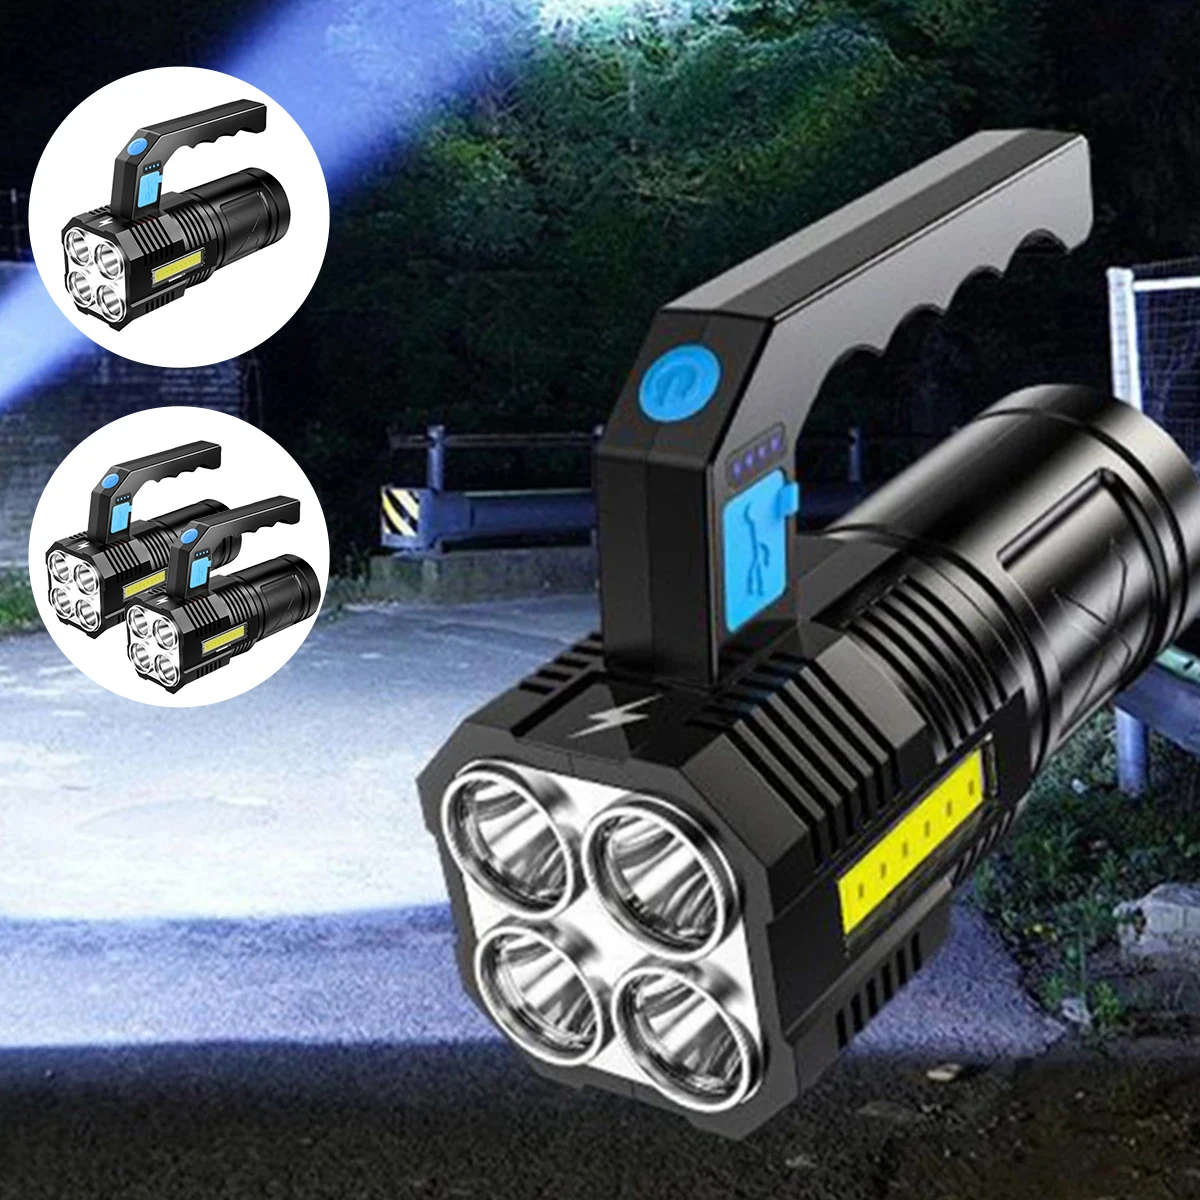 

LED Searchlight for Outdoor with 4 LEDs Spotlight 1200mAh USB Chargeable Strong Light Torch Life-grade Waterproof Flashlight wit